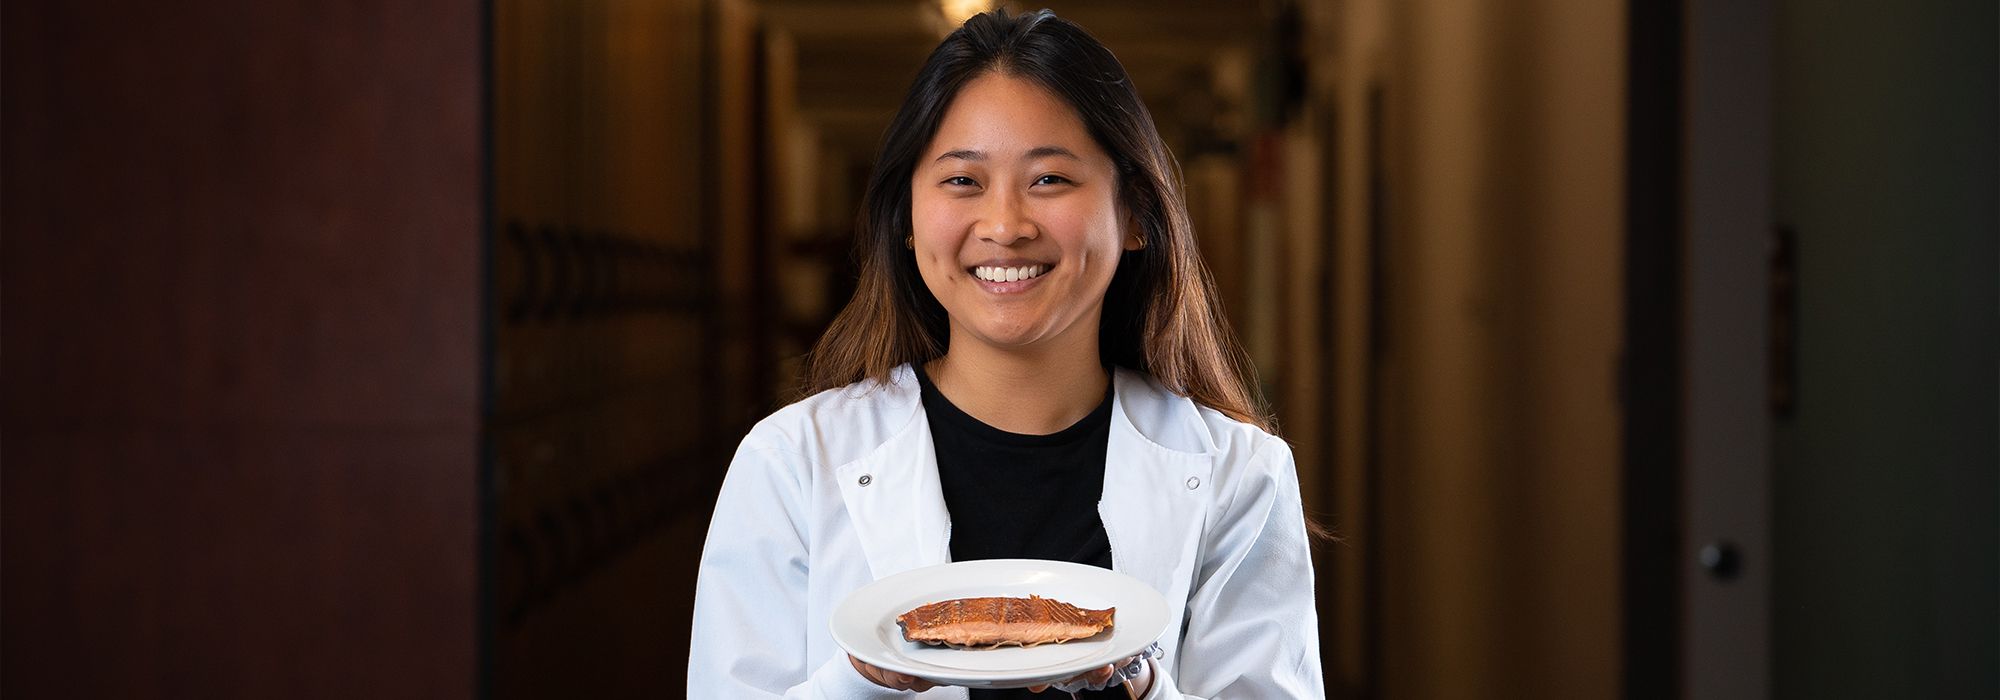 Carolyn Zhang holding a plate of salmon